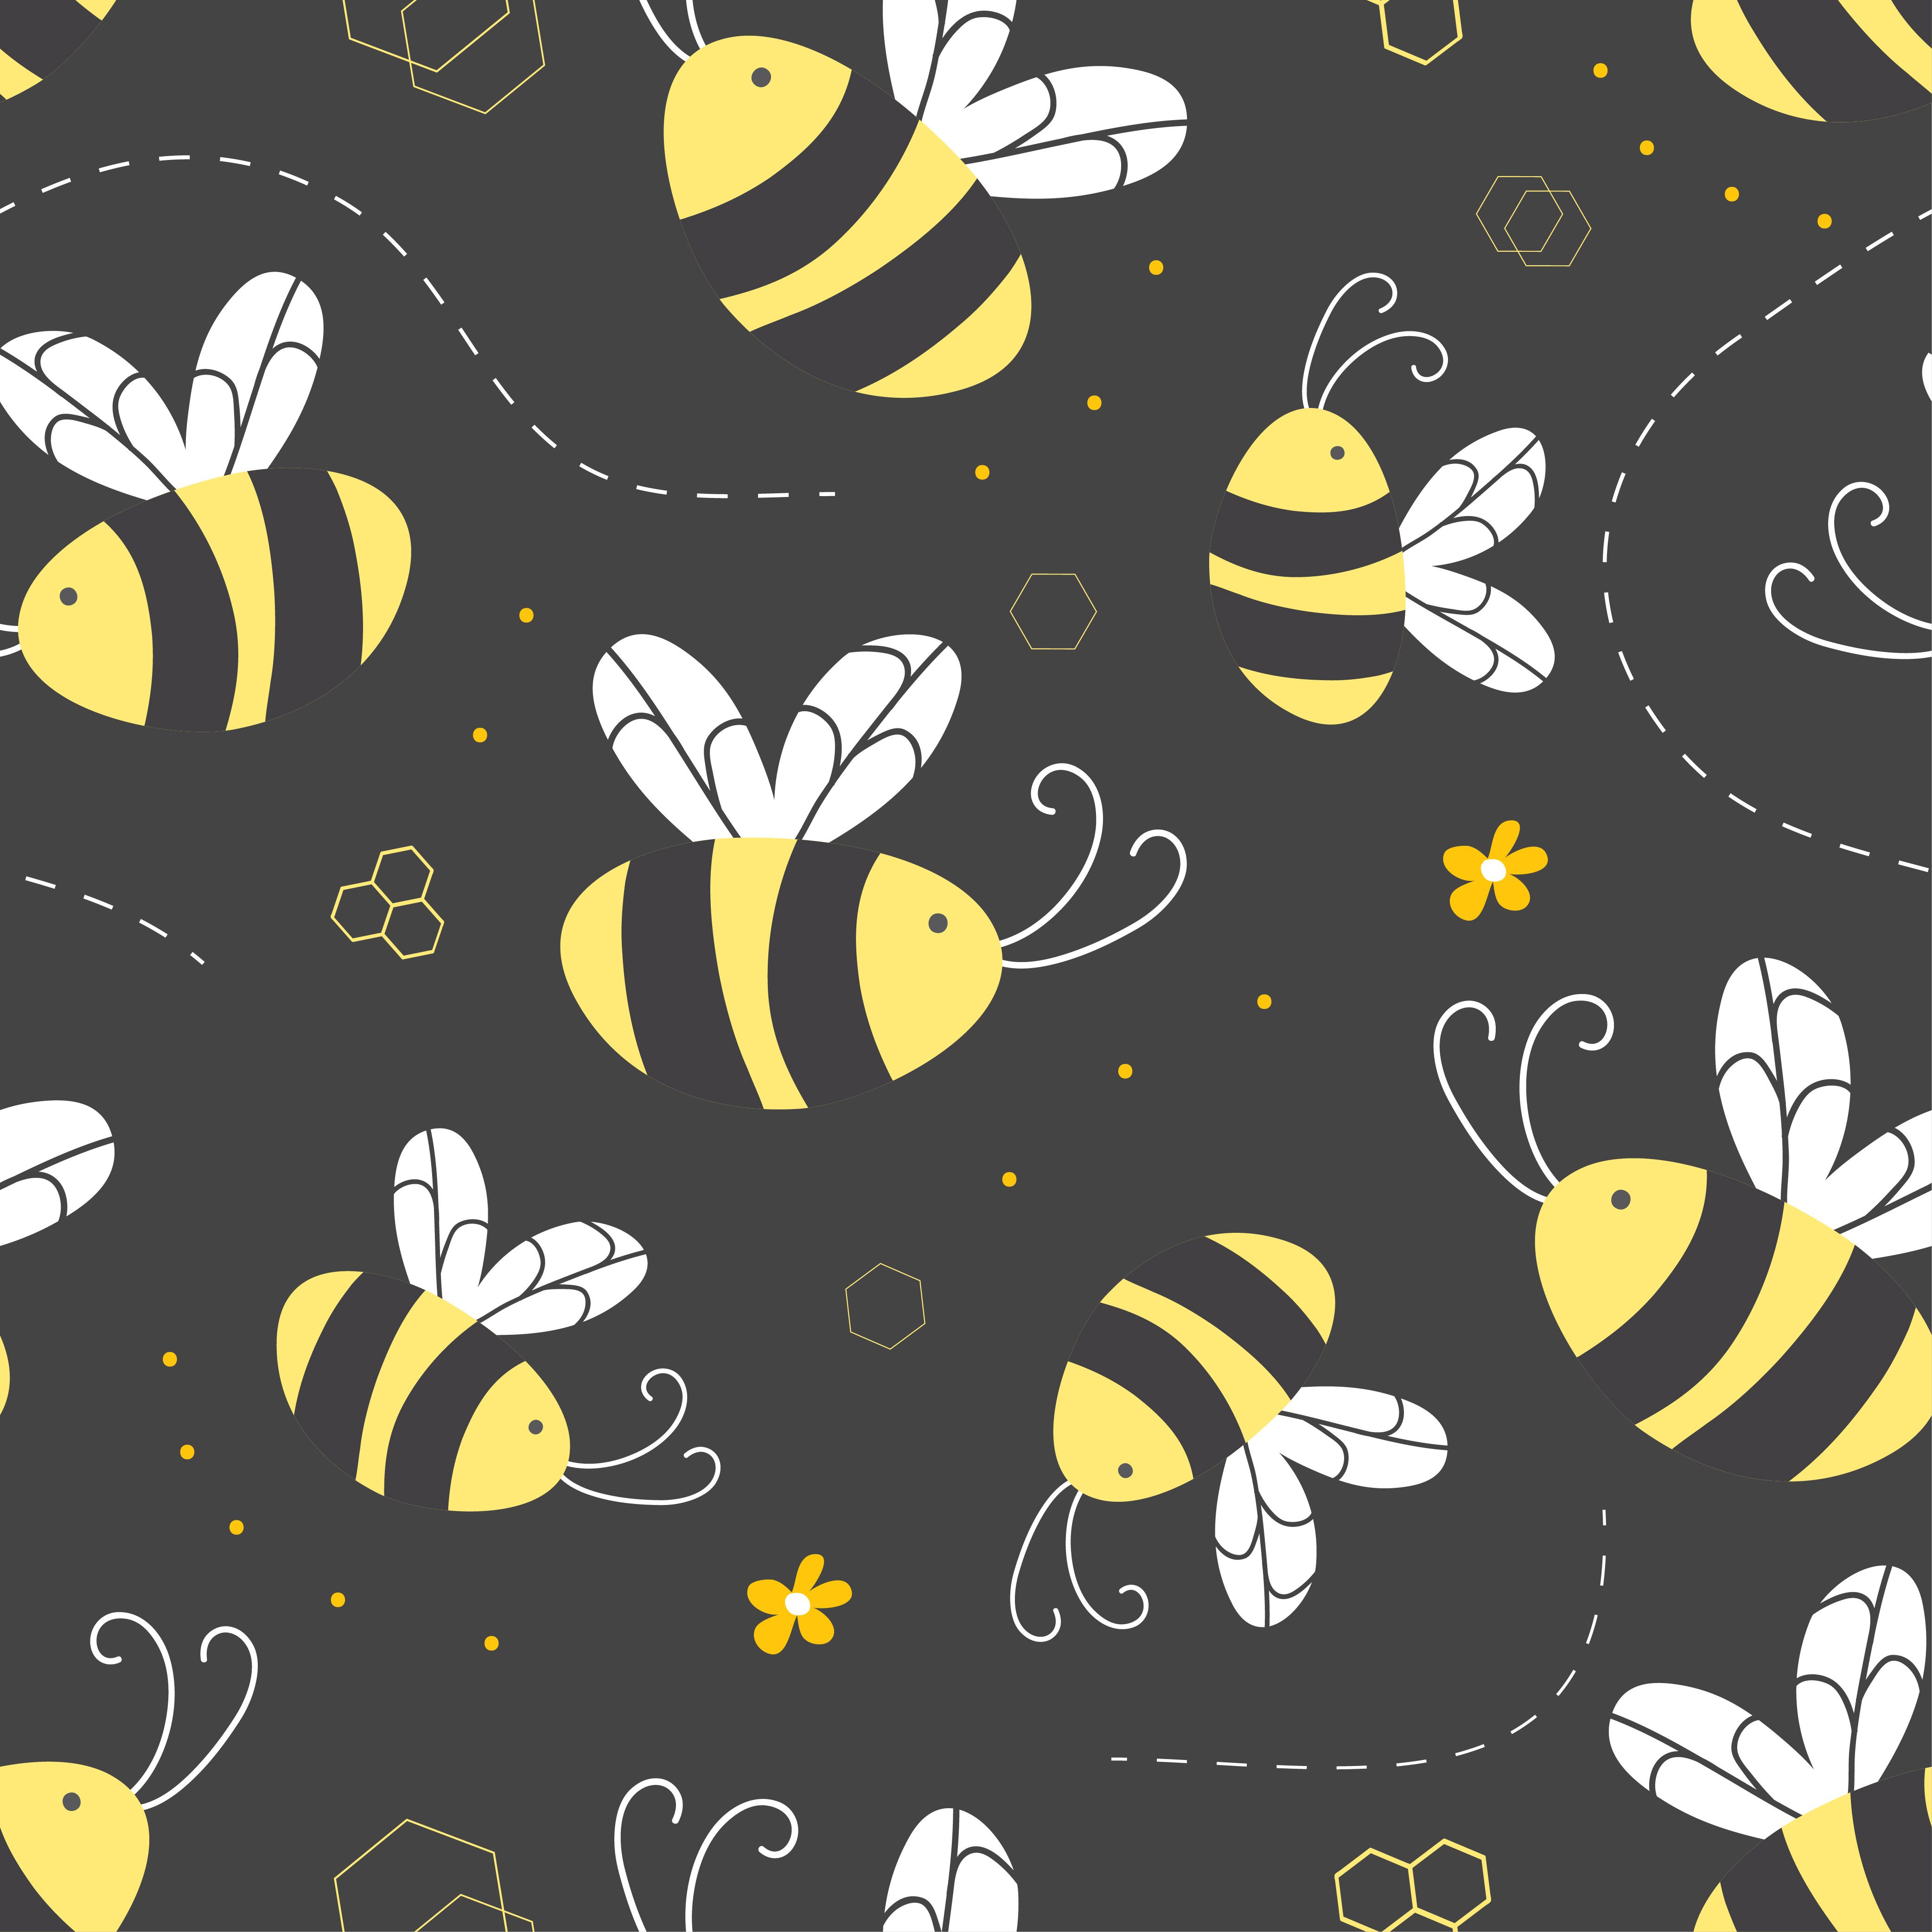 A pattern of bees and flowers on black background - Bee